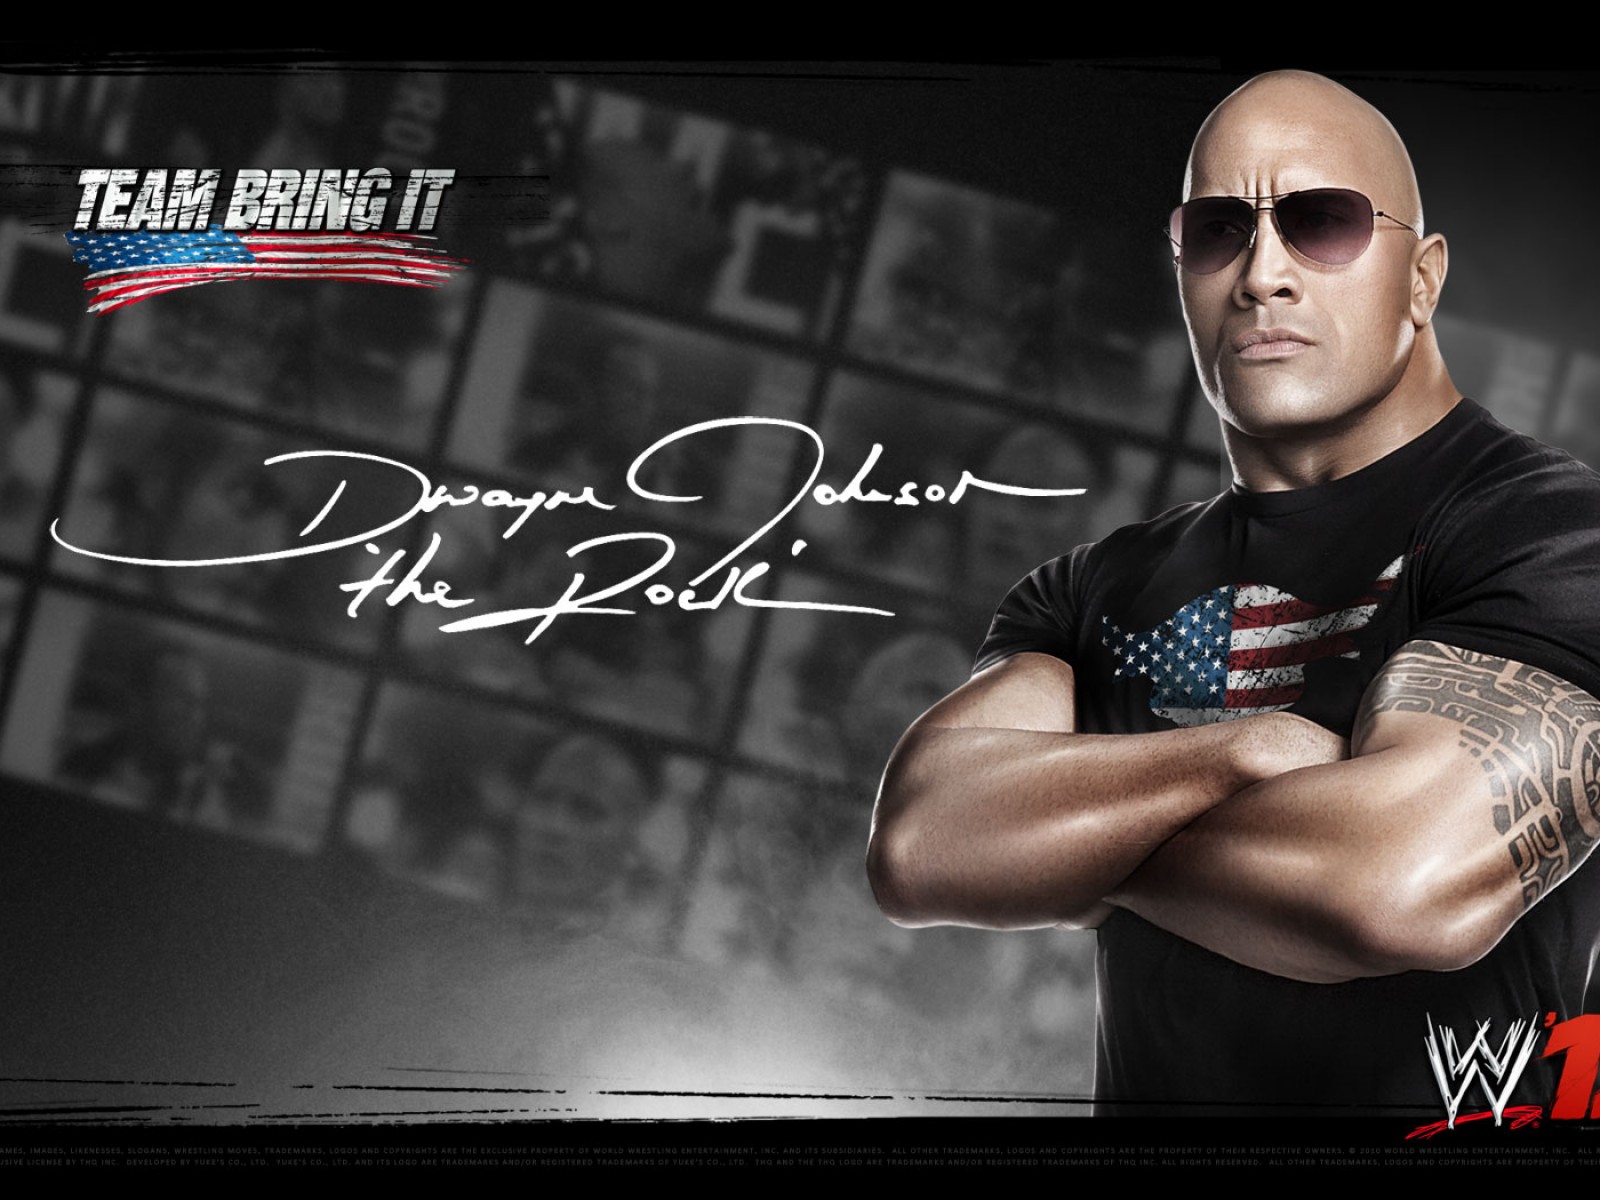 The rock new wallpapers